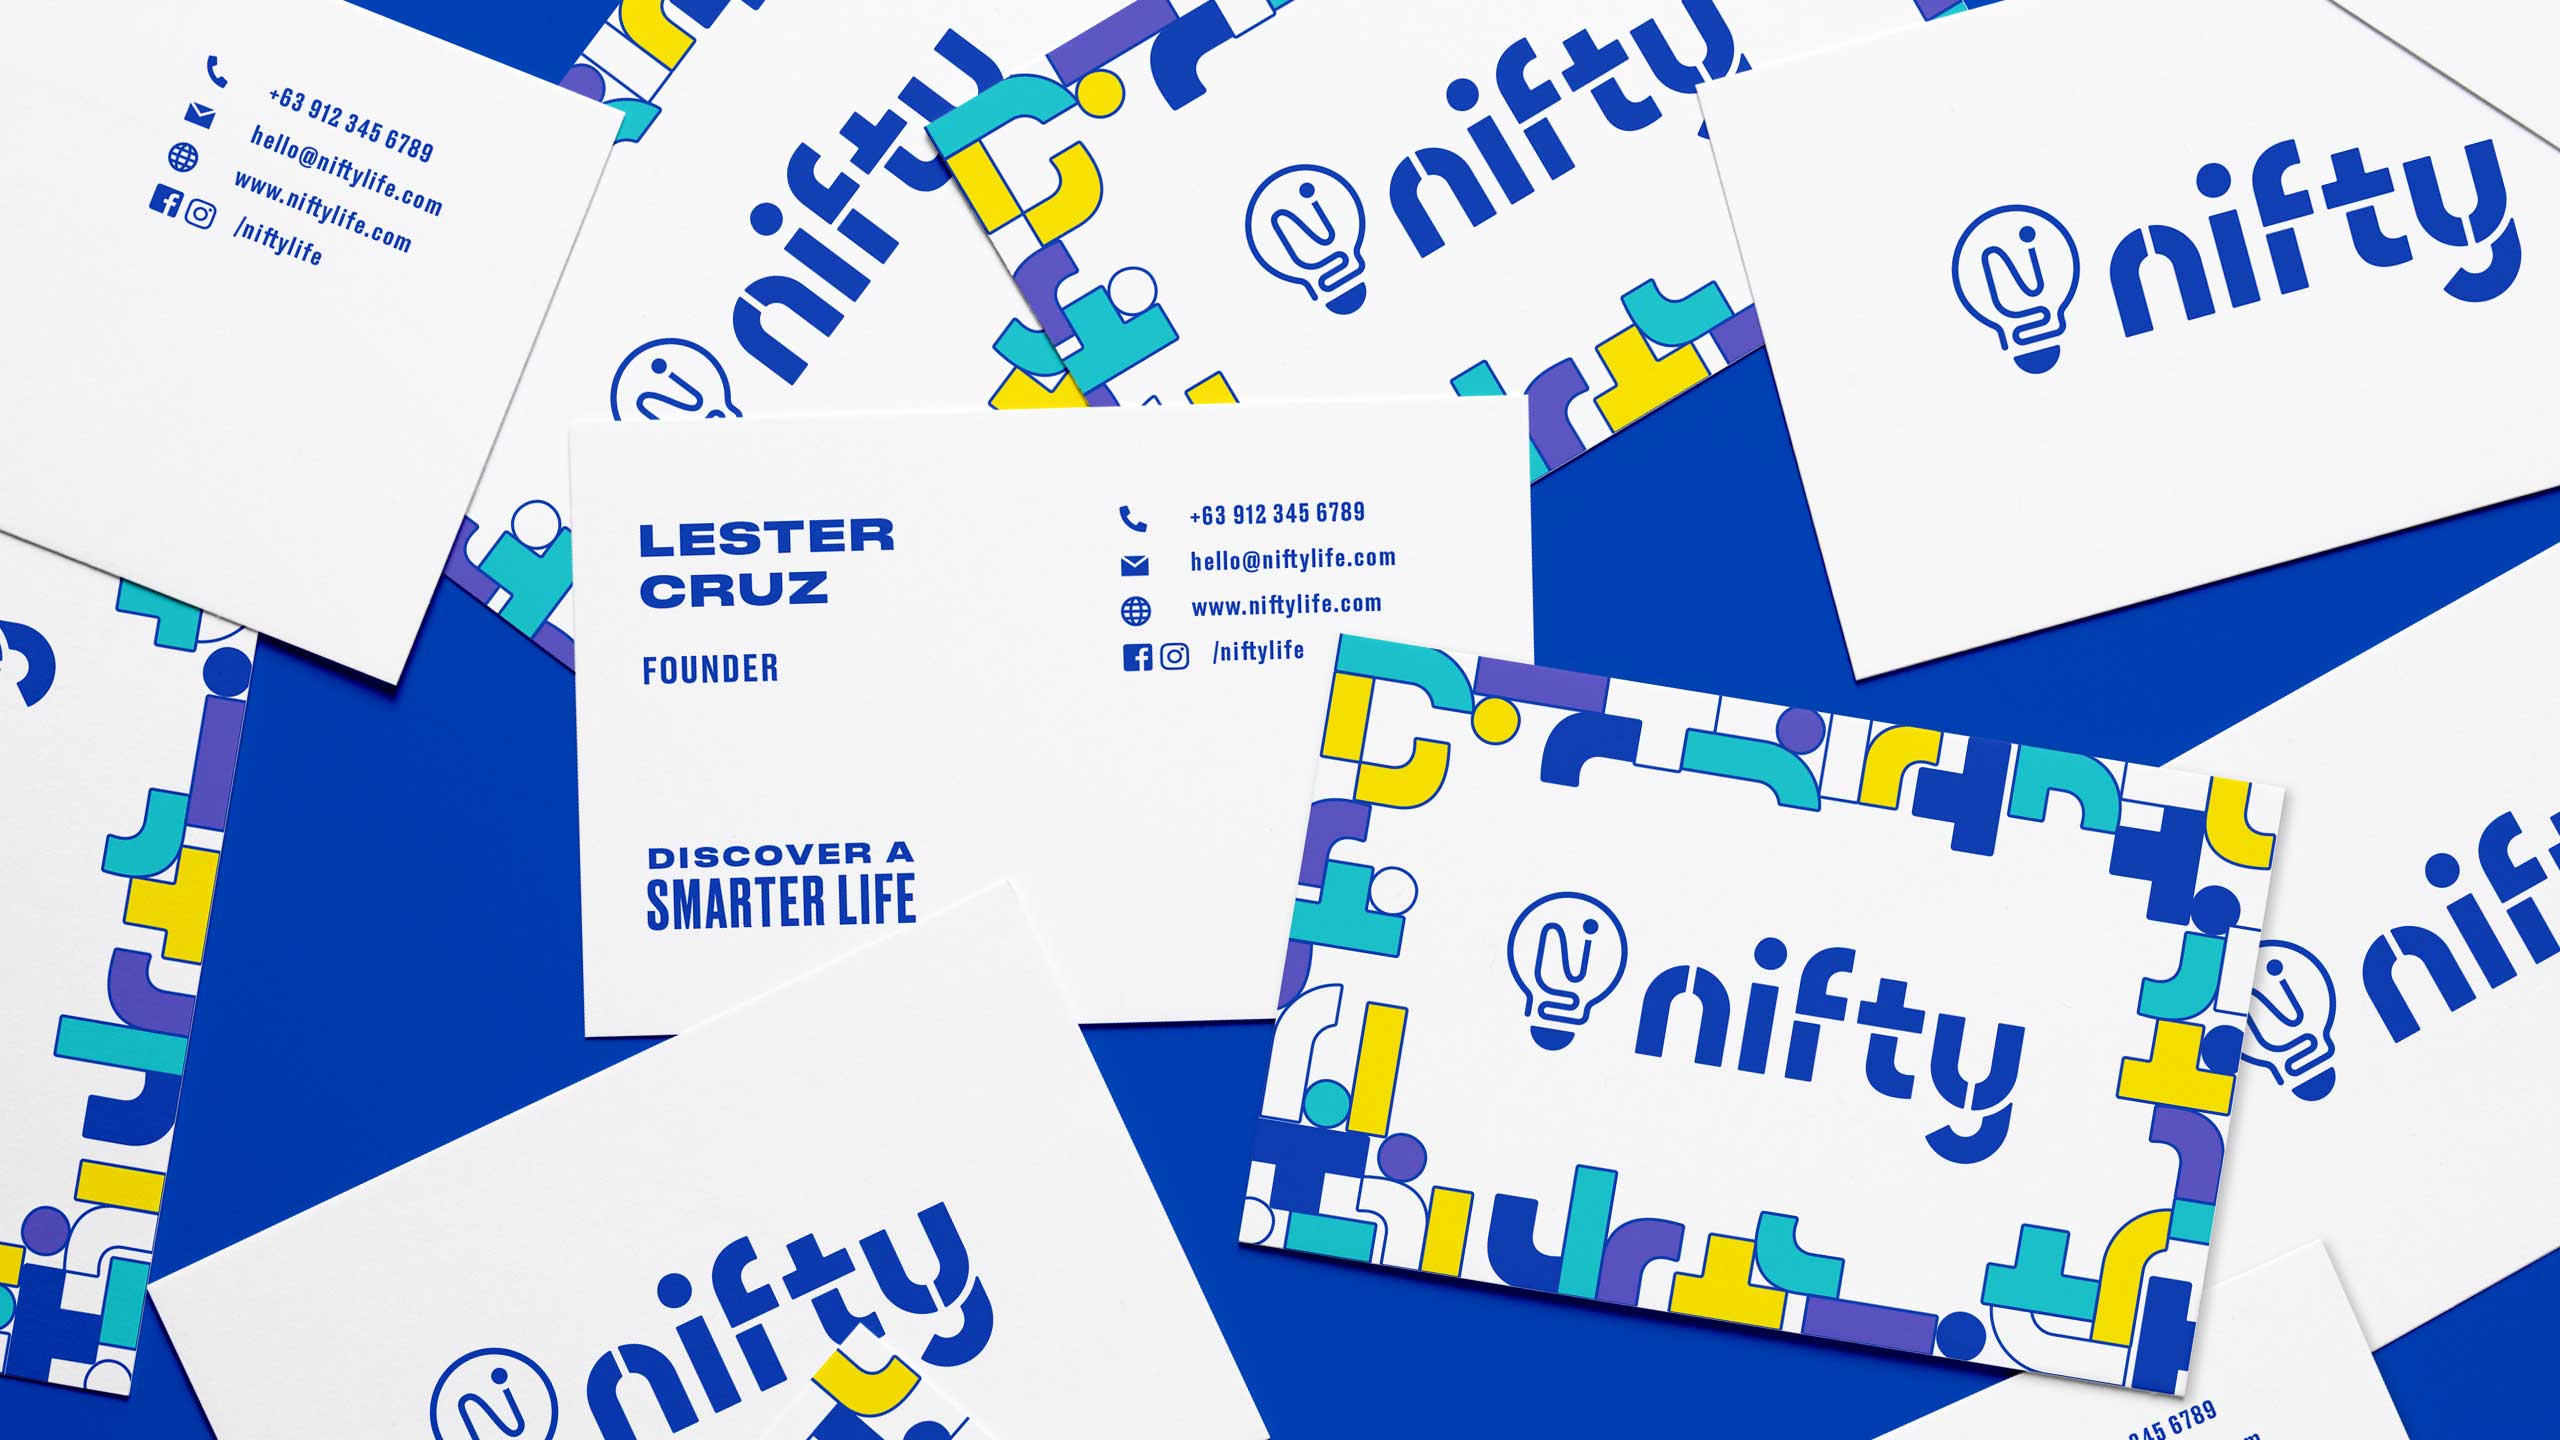 A flatlay of business cards designed Business collaterals and geometric brand pattern for retail tech brand Nifty